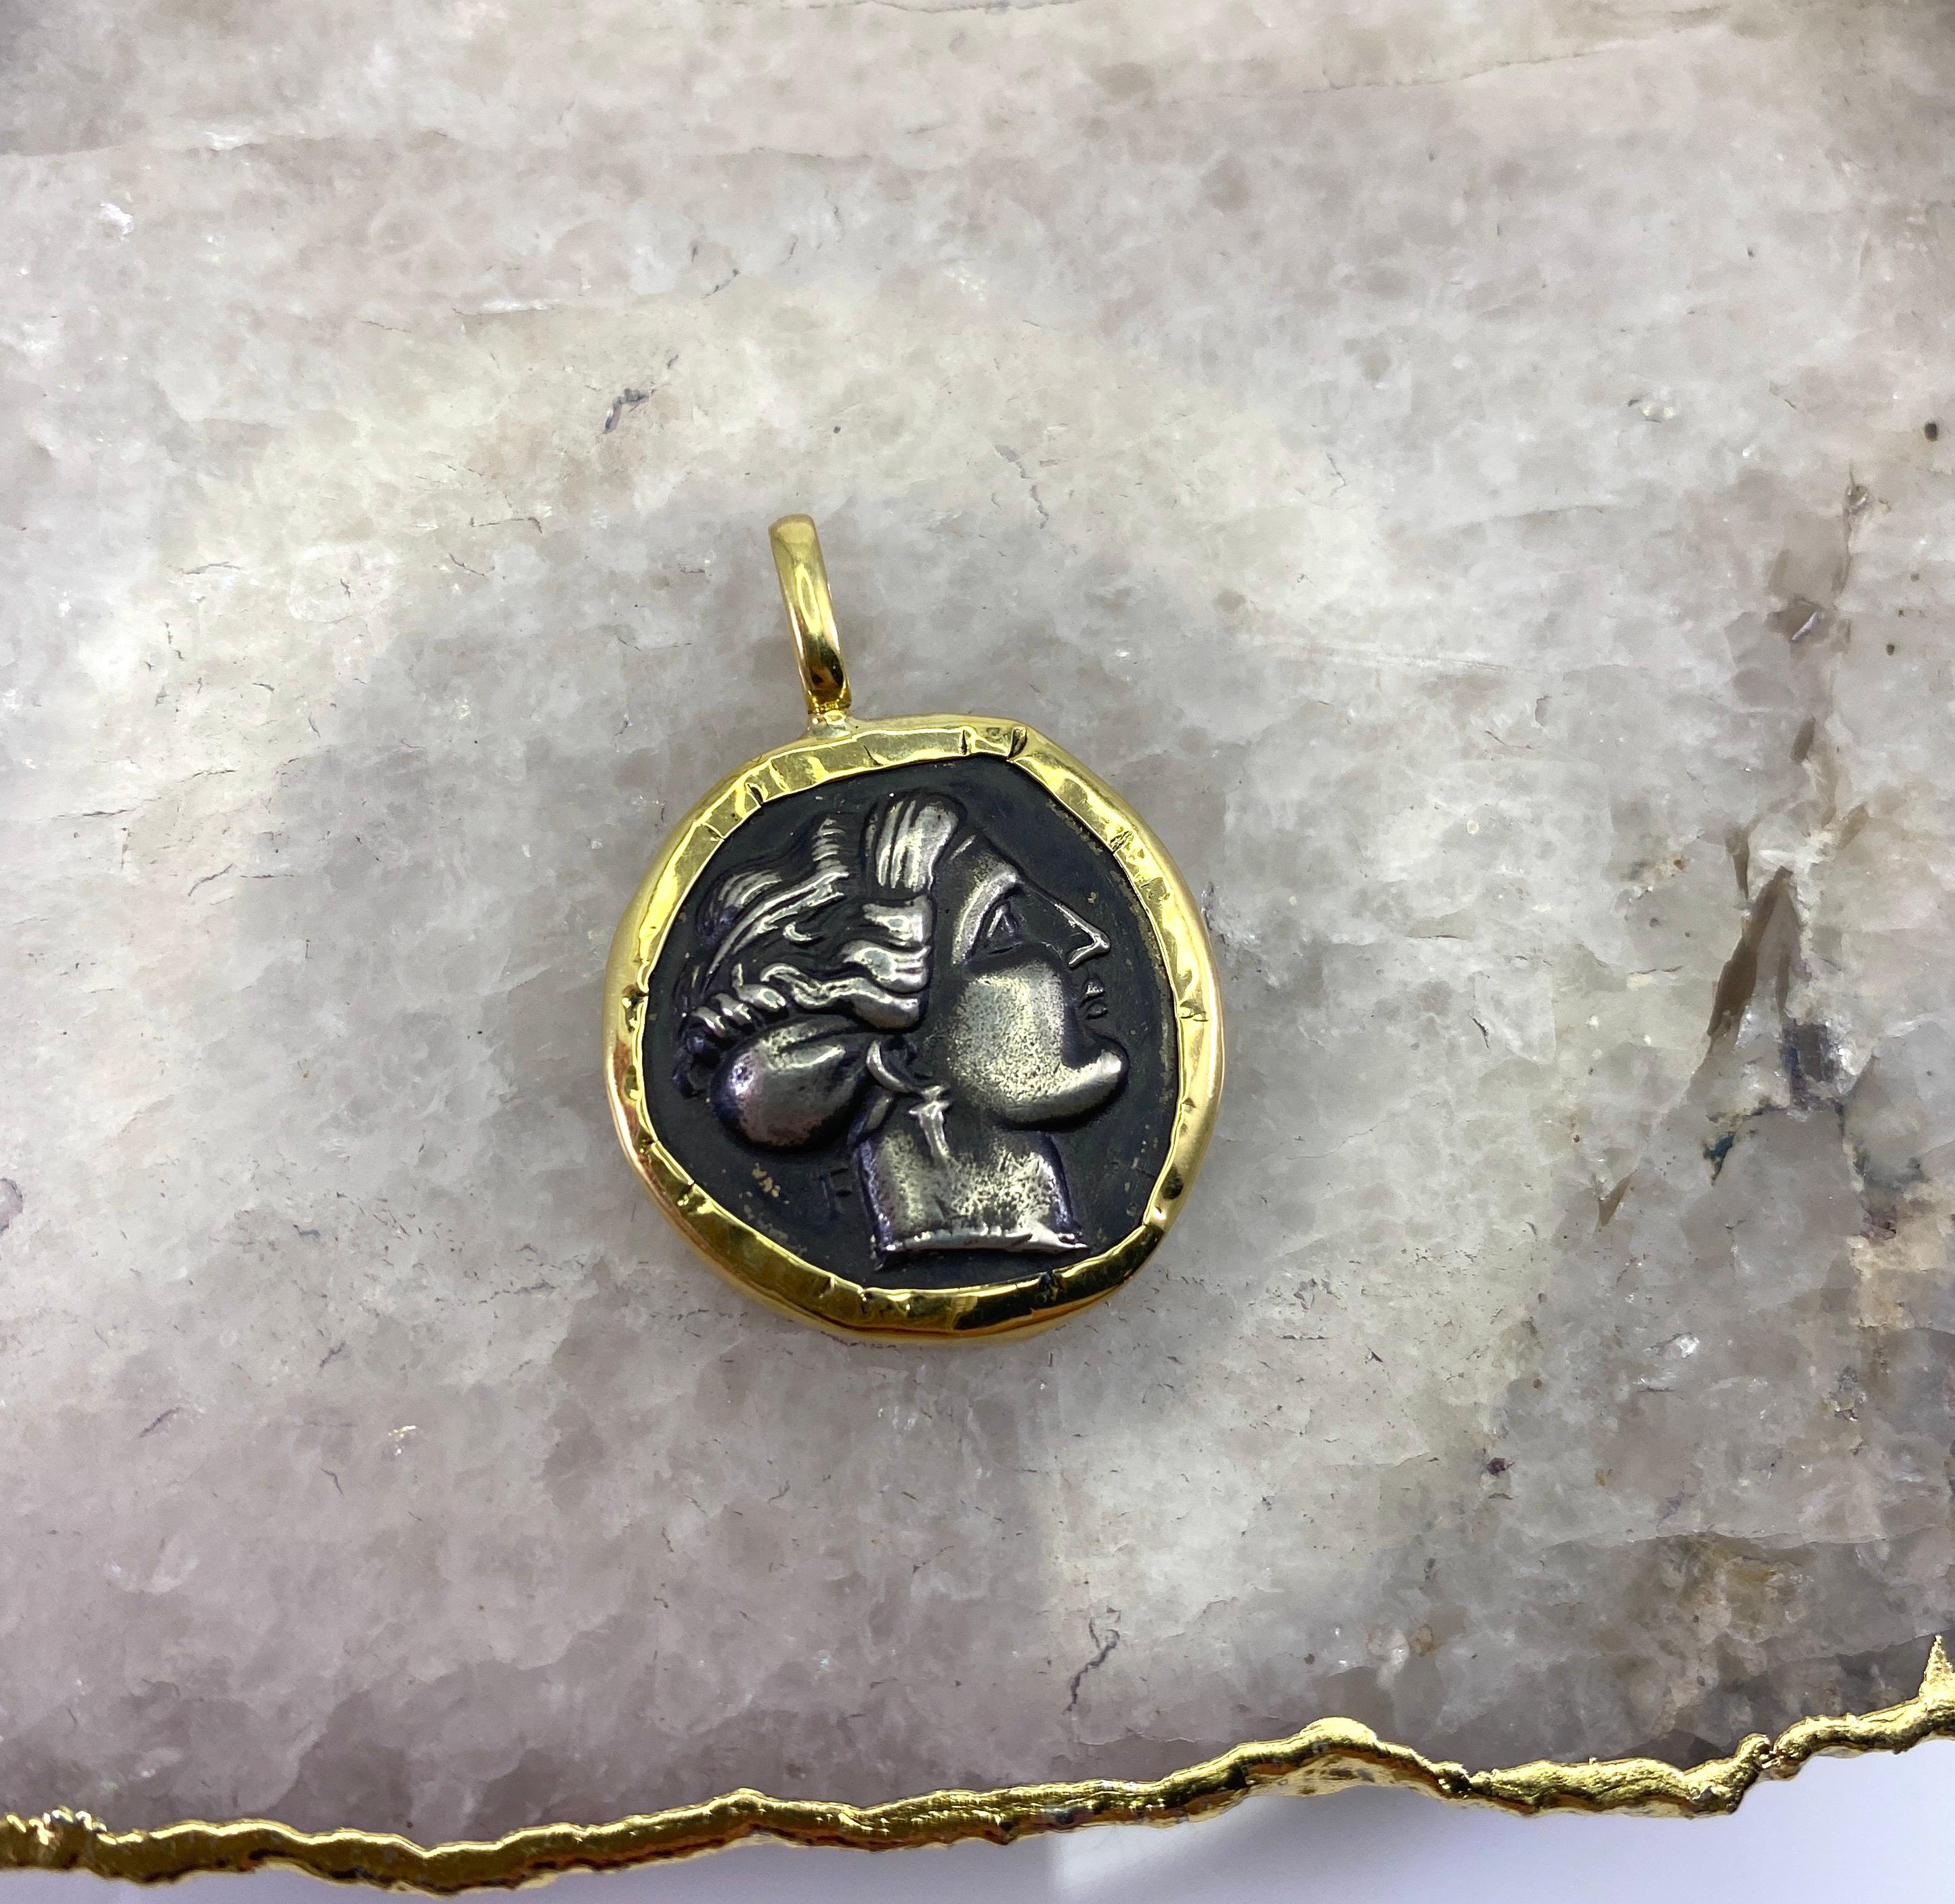 This S.Georgios designer 18 Karat Yellow Gold handmade Pendant Necklace pictures face of Olympia, the Greek Princess and mother of Alexander the Great imprinted in 925 Silver Coin. The coin is a replica of an Ancient coin. The rim and hook of the